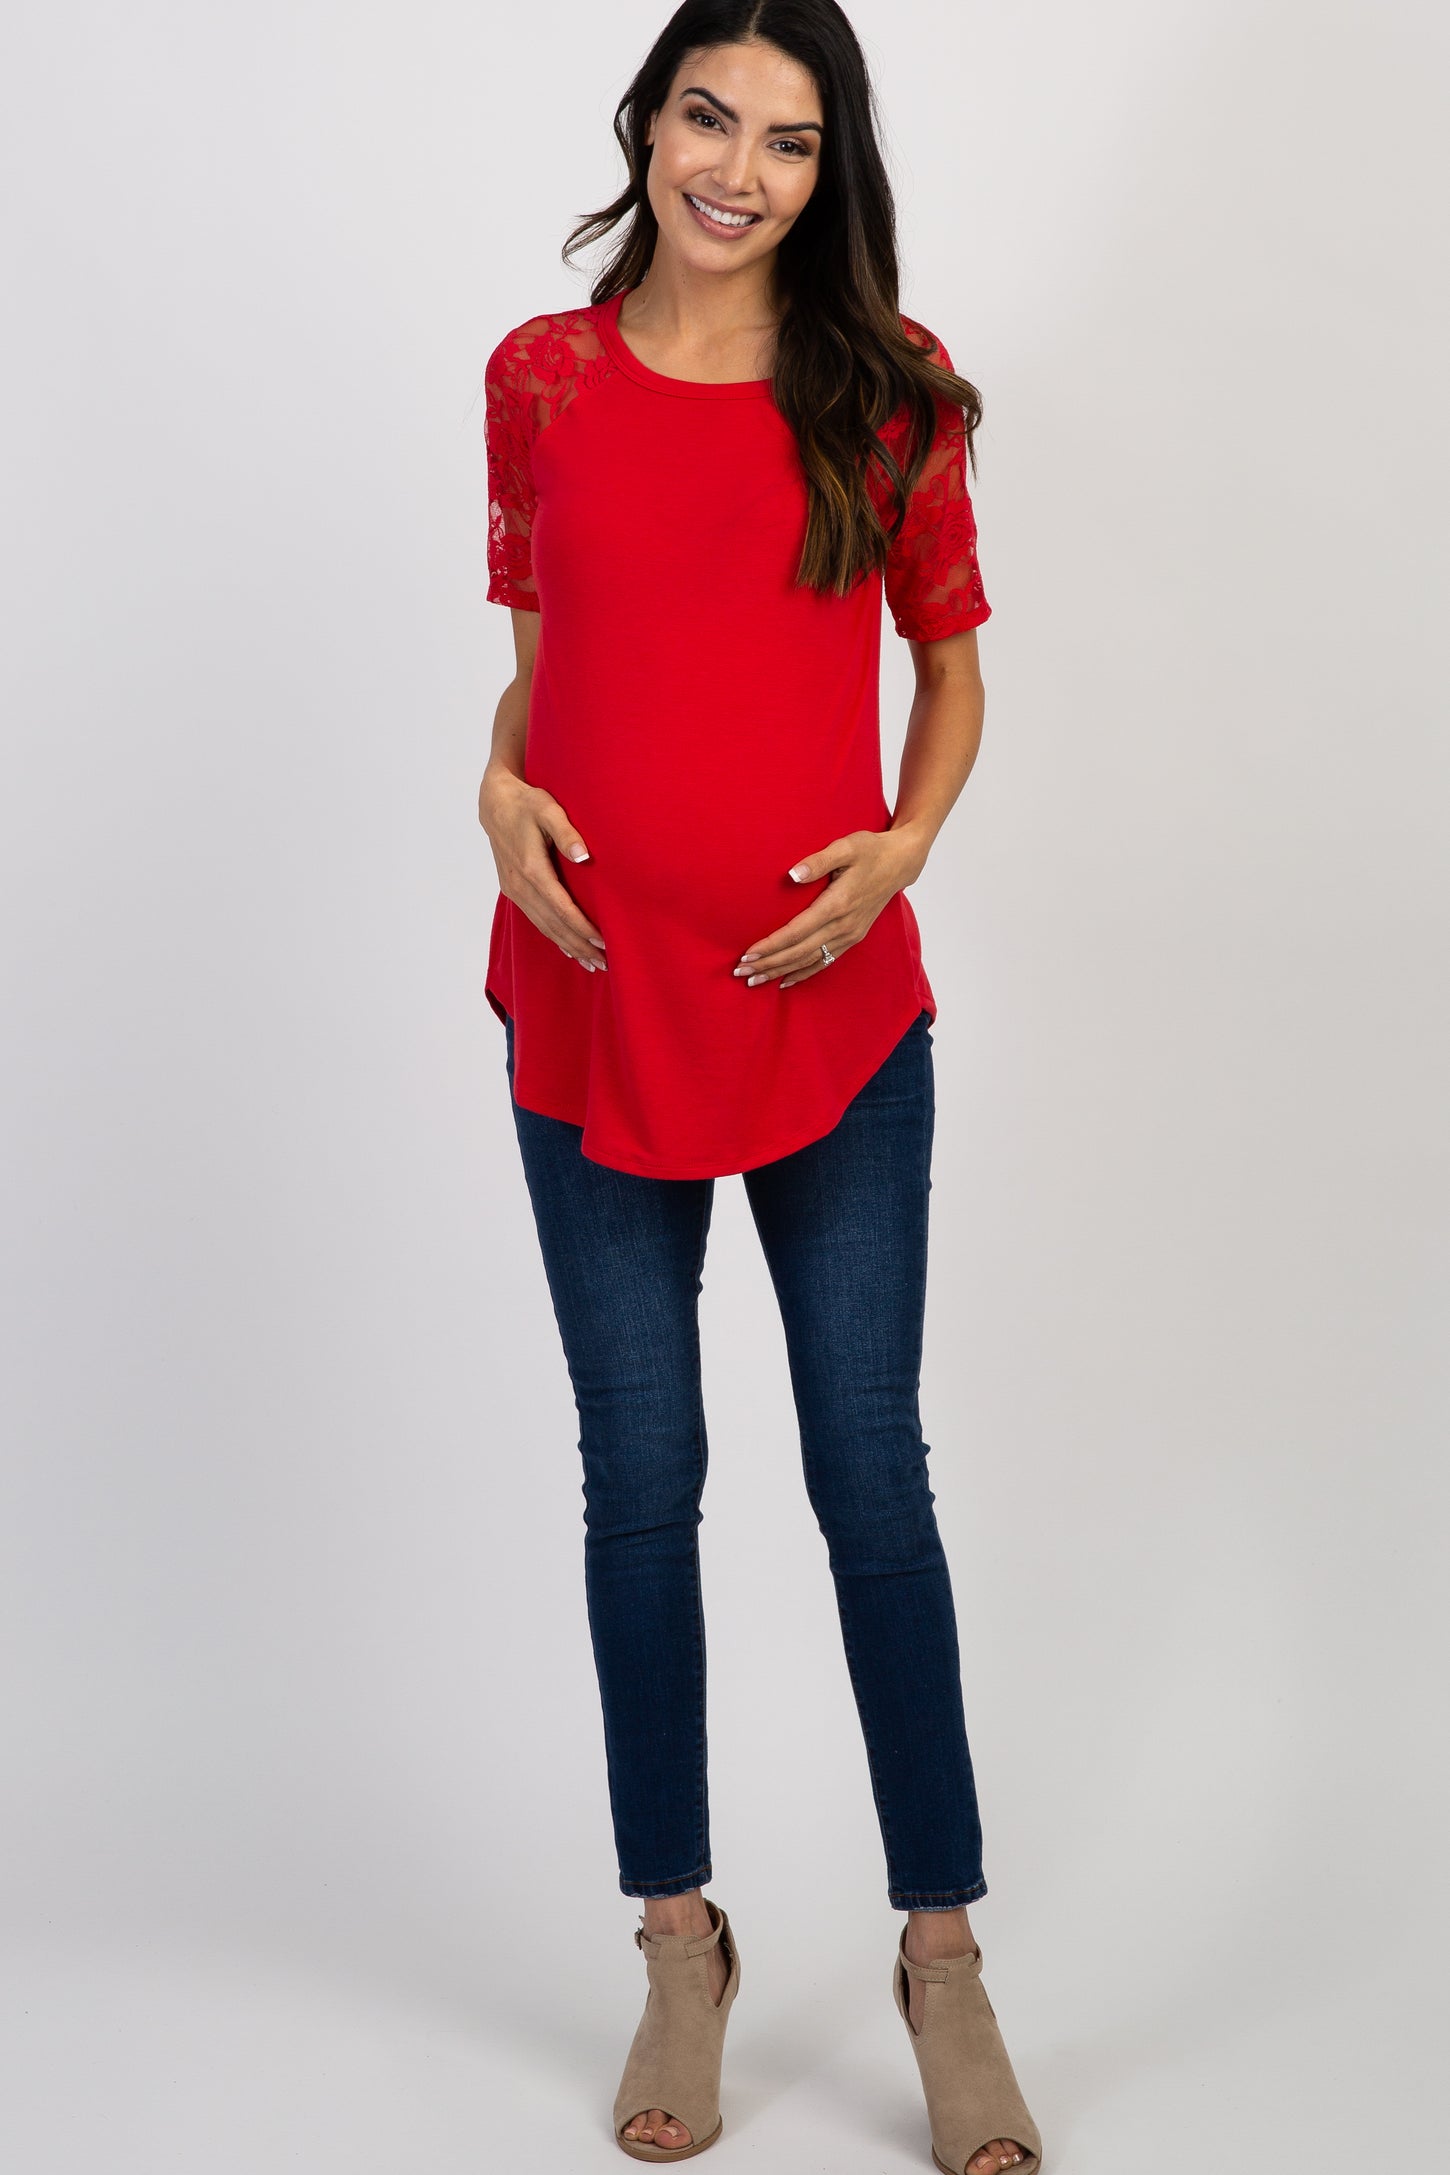 Red Lace Short Sleeve Maternity Top